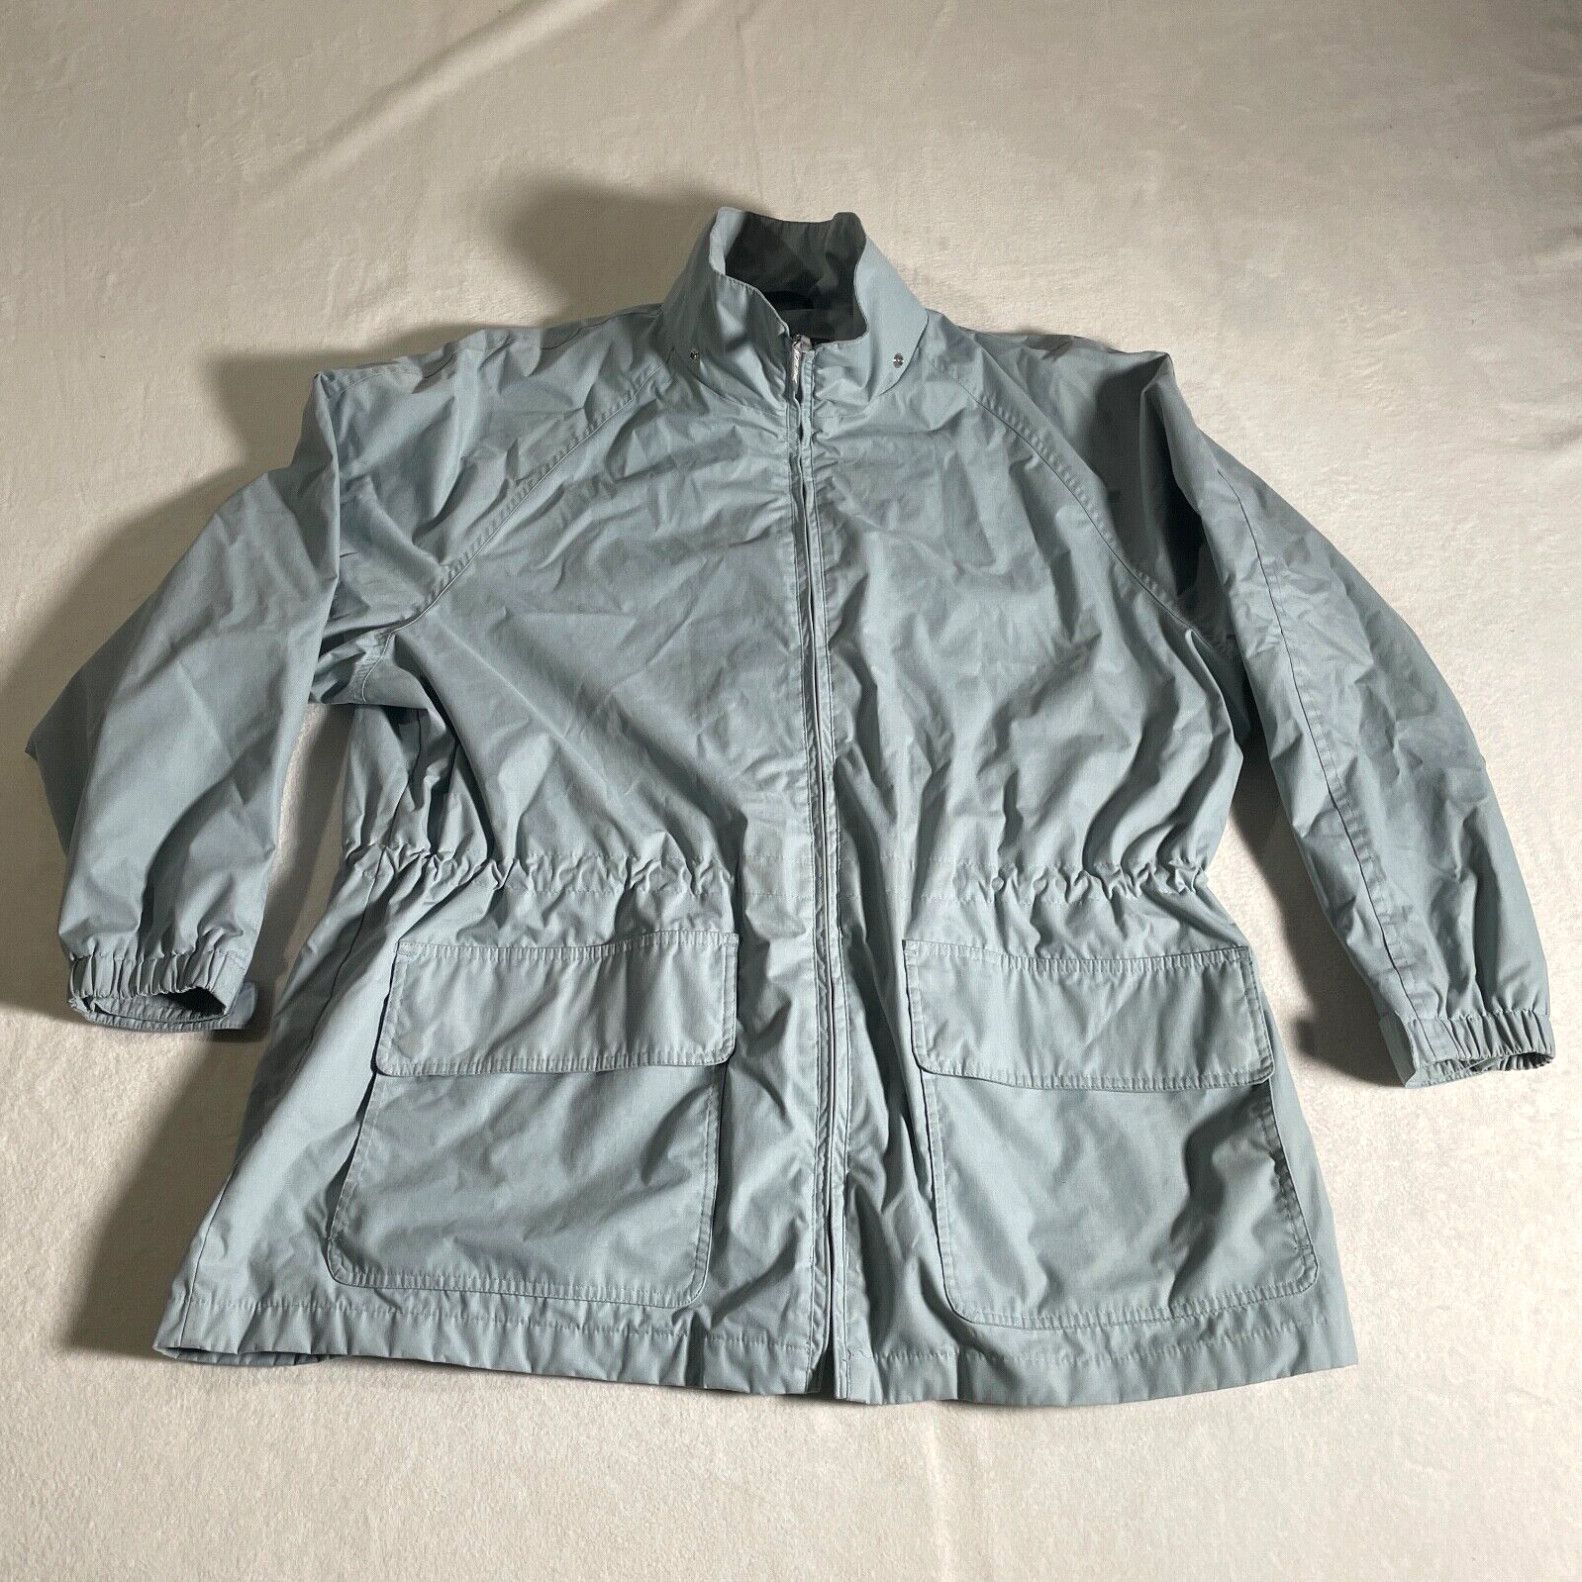 Vintage Vintage Pacific Trail Jacket Womens 1X Extra Larg Full Zip Coat Waterproof Size XL / US 12-14 / IT 48-50 - 1 Preview